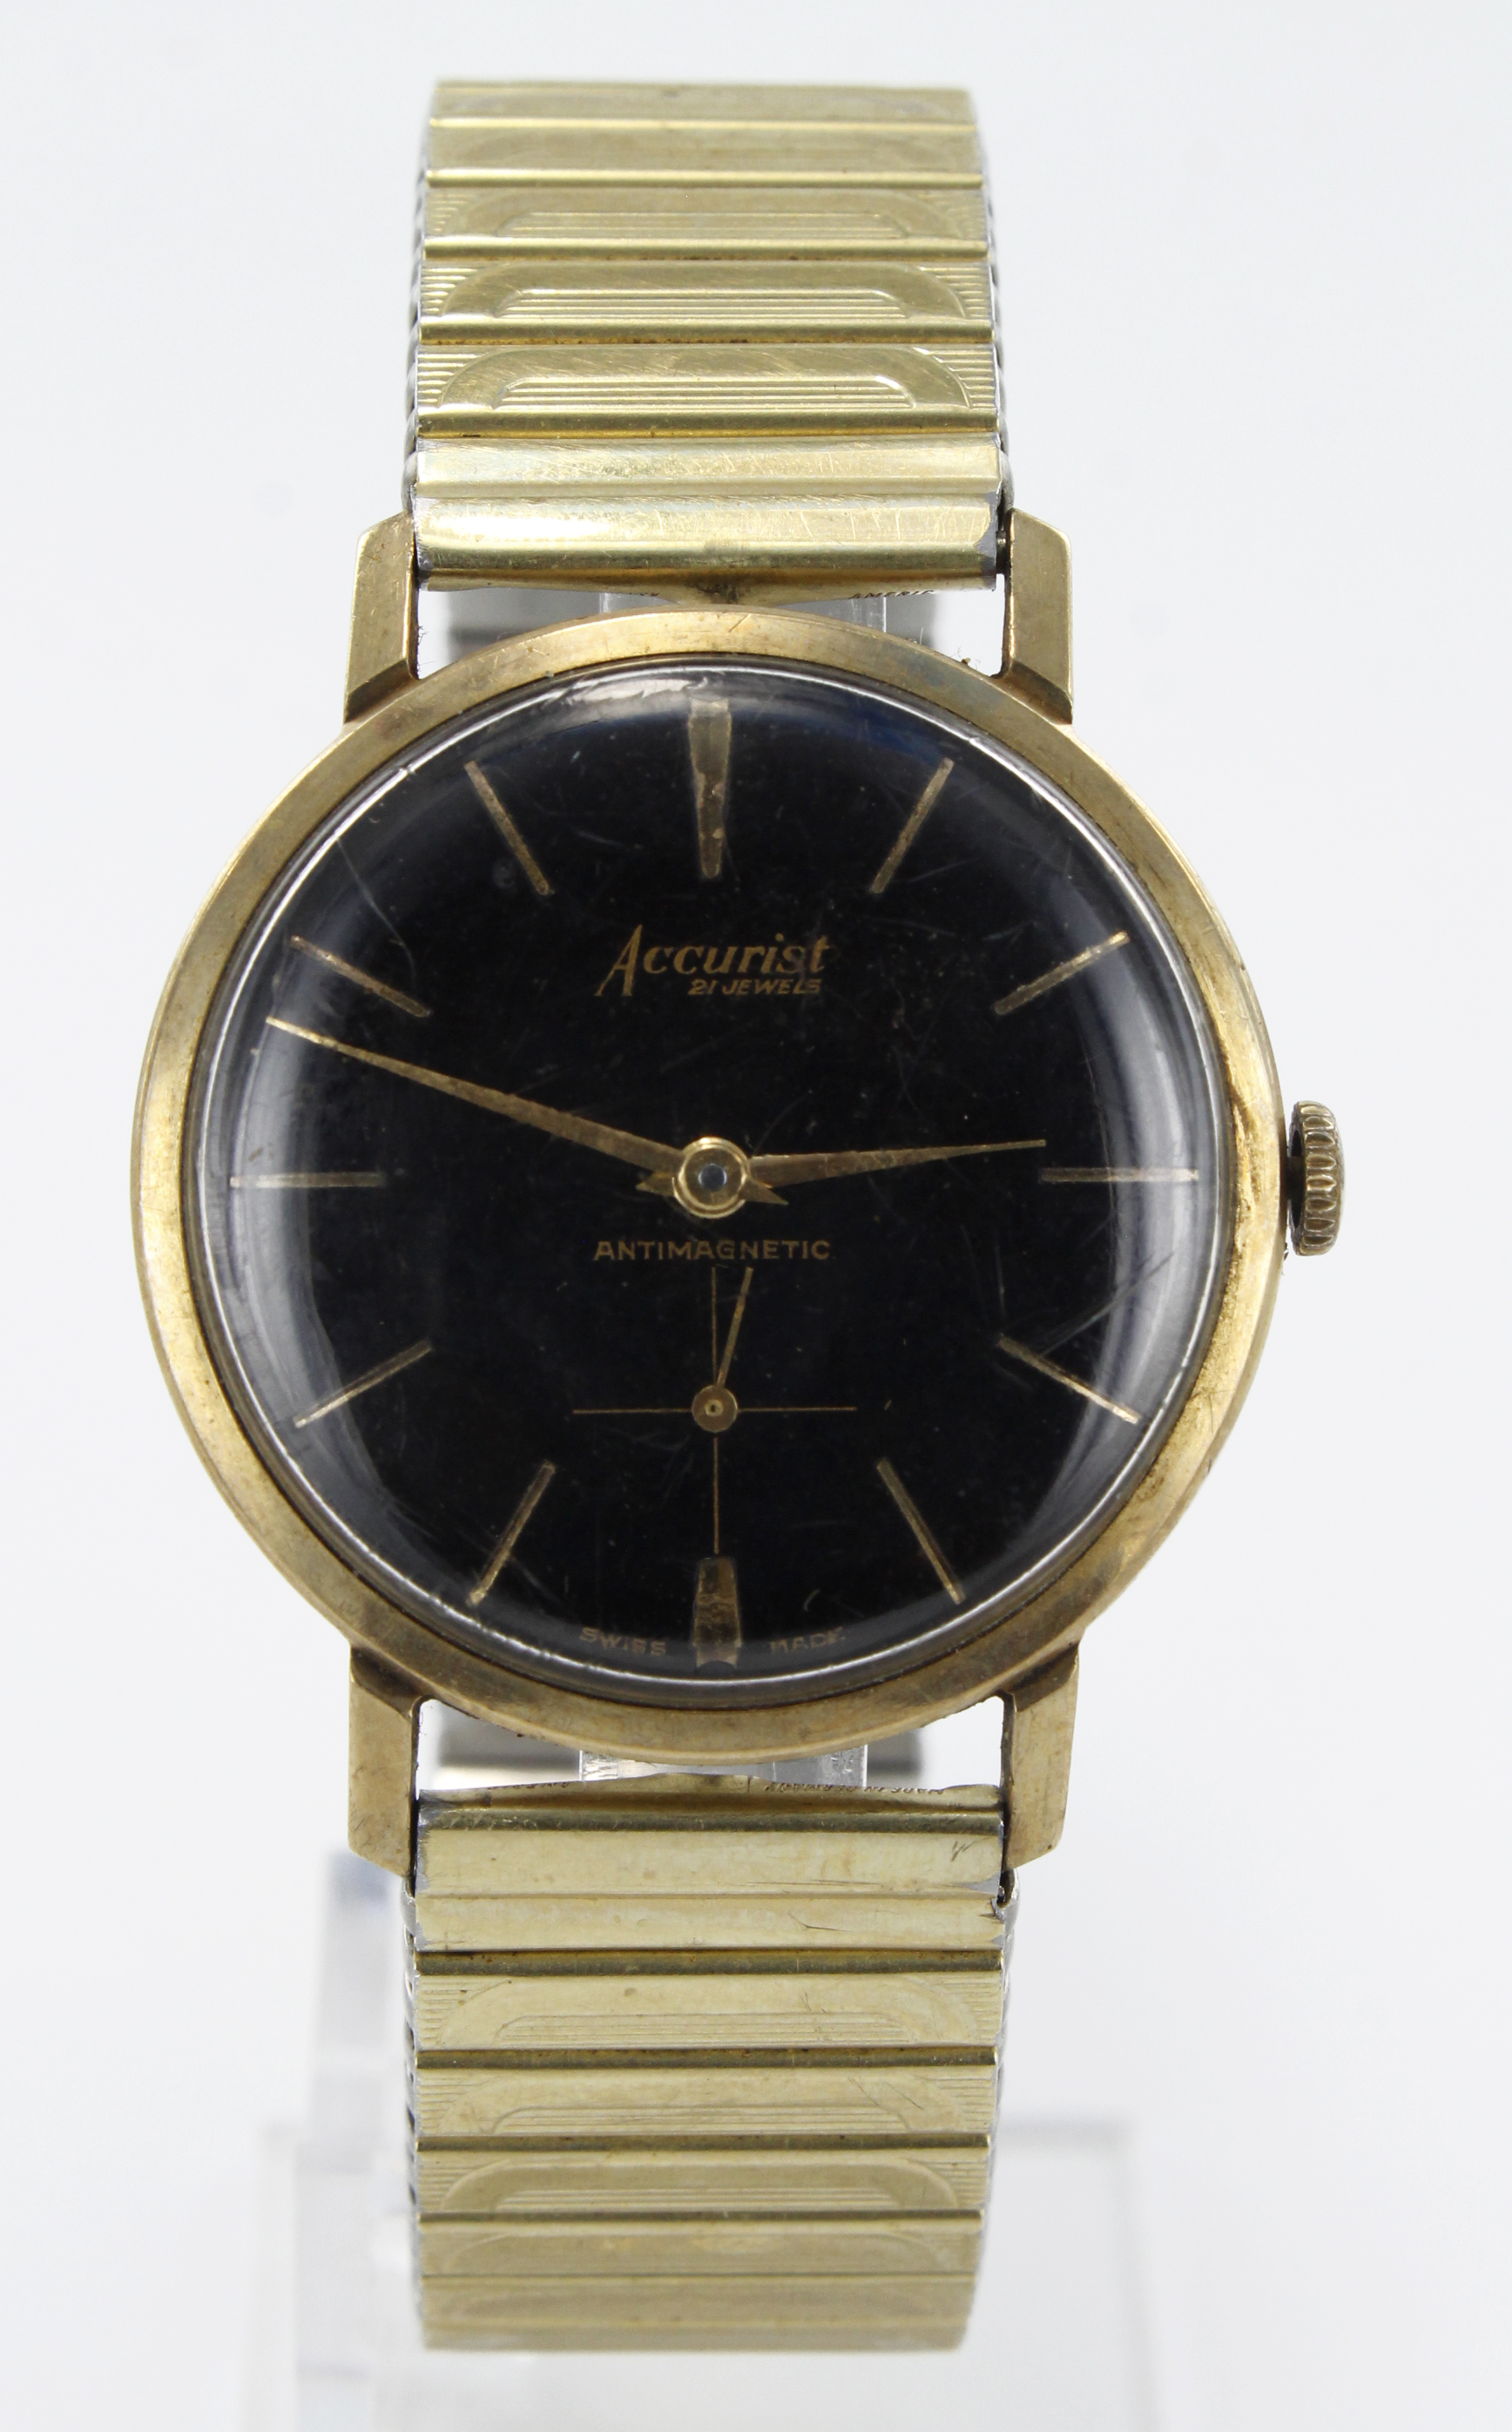 Gents 9ct cased Accurist manual wind wristwatch, case no. 1495. The black gloss dial with gilt baton